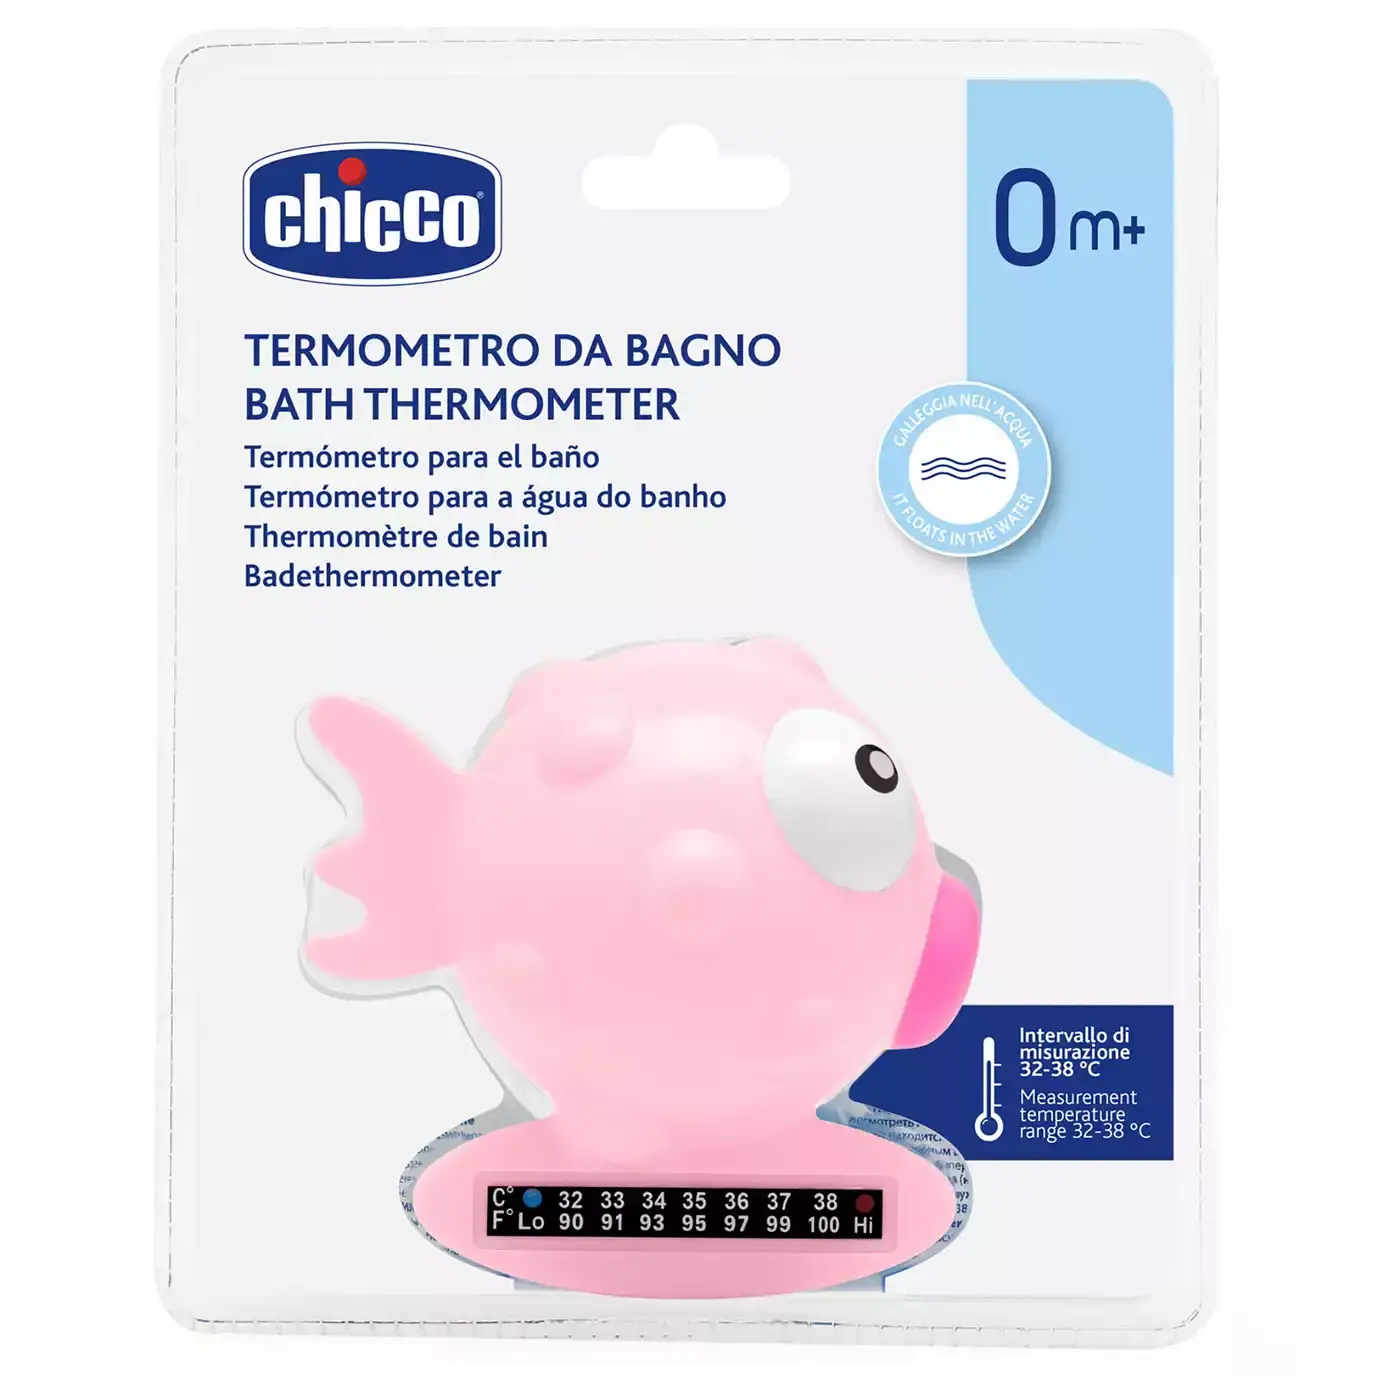 Badethermometer Fisch chicco Rosa 2000562204708 4